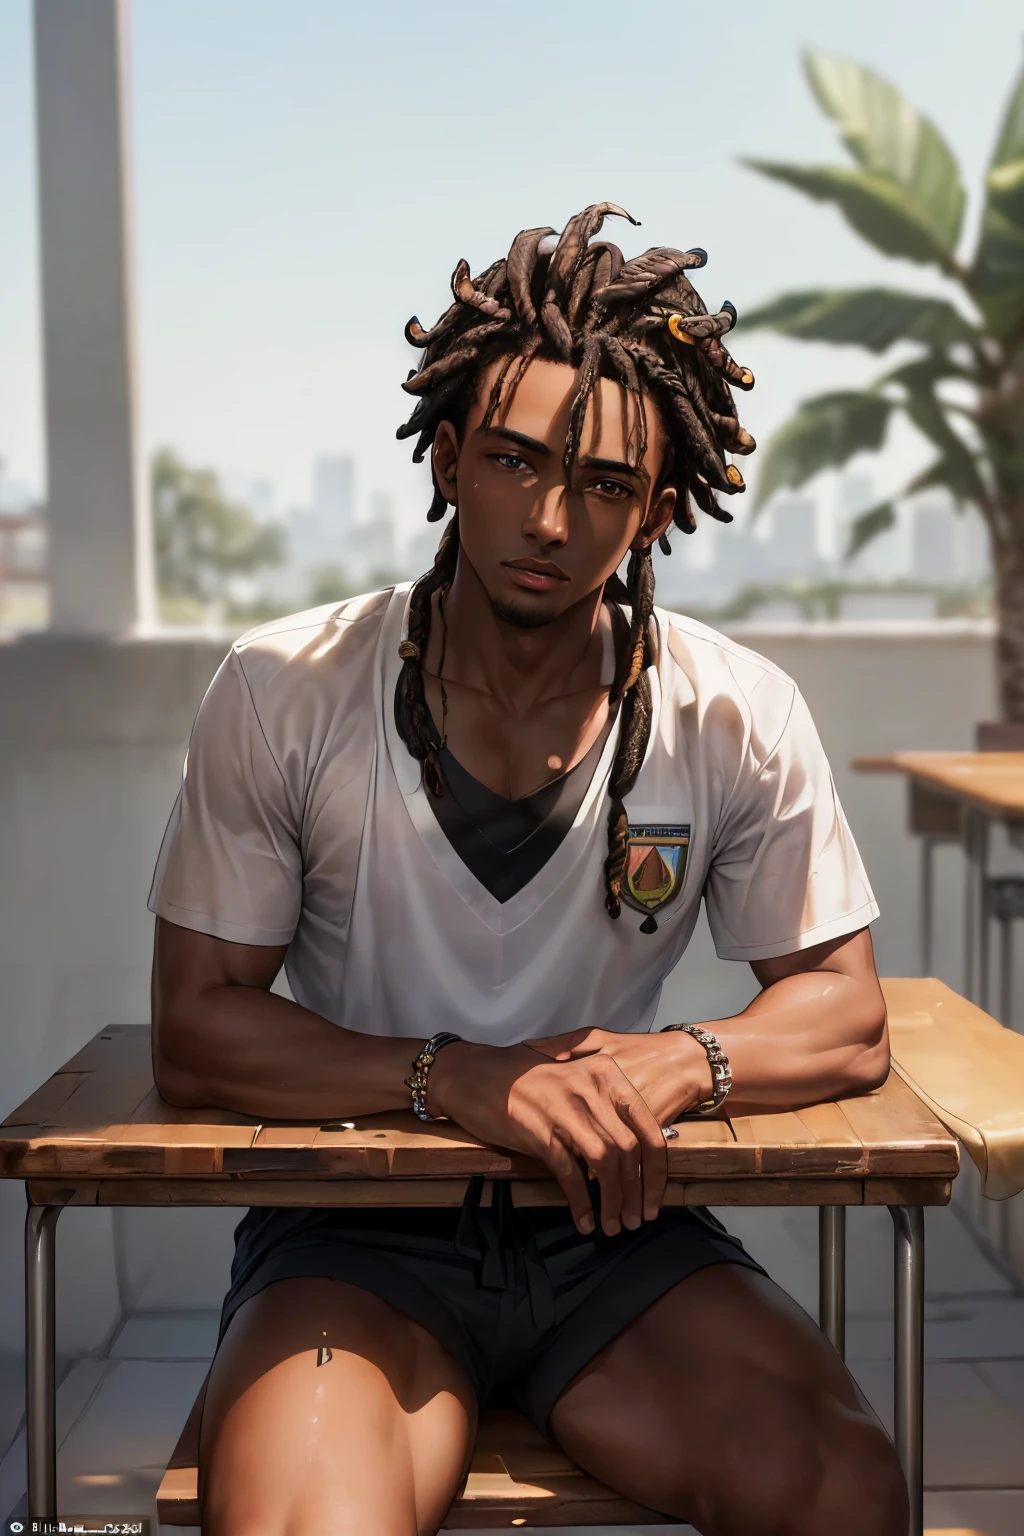 ((Mejor calidad): This image exhibits the highest level of quality, showcasing every detail in exceptional clarity and depth. It is an intricately crafted ((obra maestra)) that captures the essence of a ((detallado)) young man with perfection.

He is a slender, ((flaco)) ((chico negro)), adorned with ((rastas)), sitting ((recostado en el pupitre)). His flawless ((piel negra)) complexion stands out against the crisp background, his features framed by the adult world of the classroom. Worn casually, his ((uniforme escolar)) hangs loosely on his frame, revealing